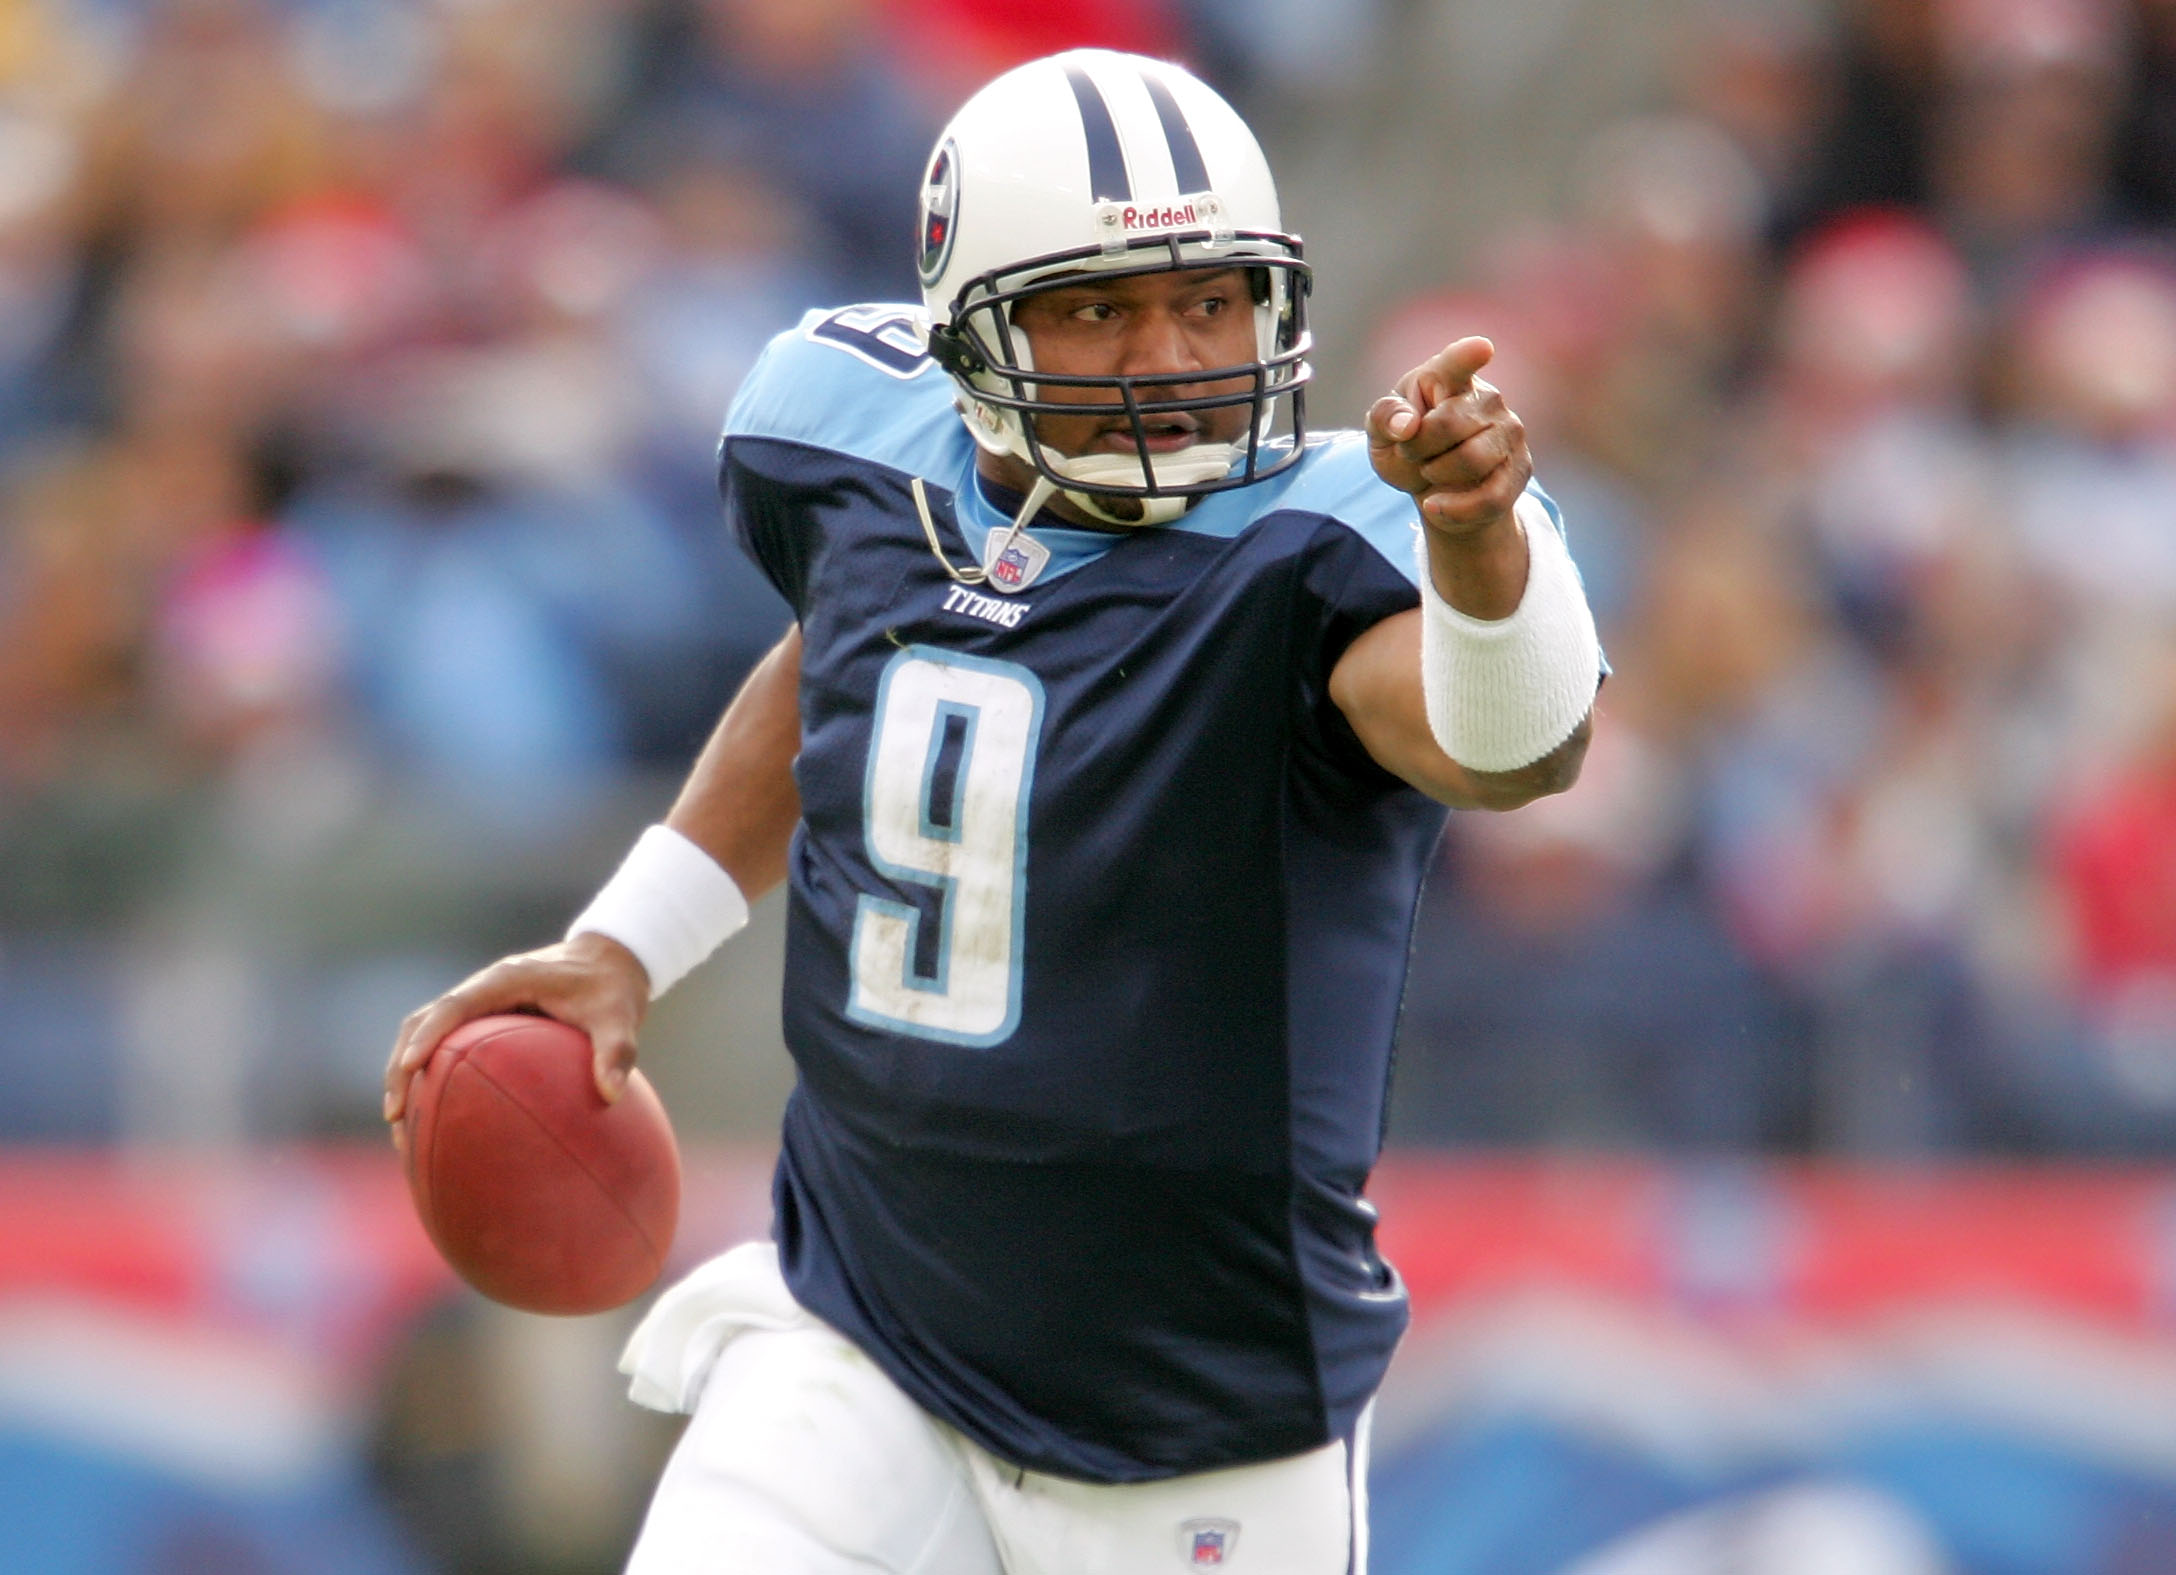 There Are Still Many Questions About the Tragic Death of Steve McNair